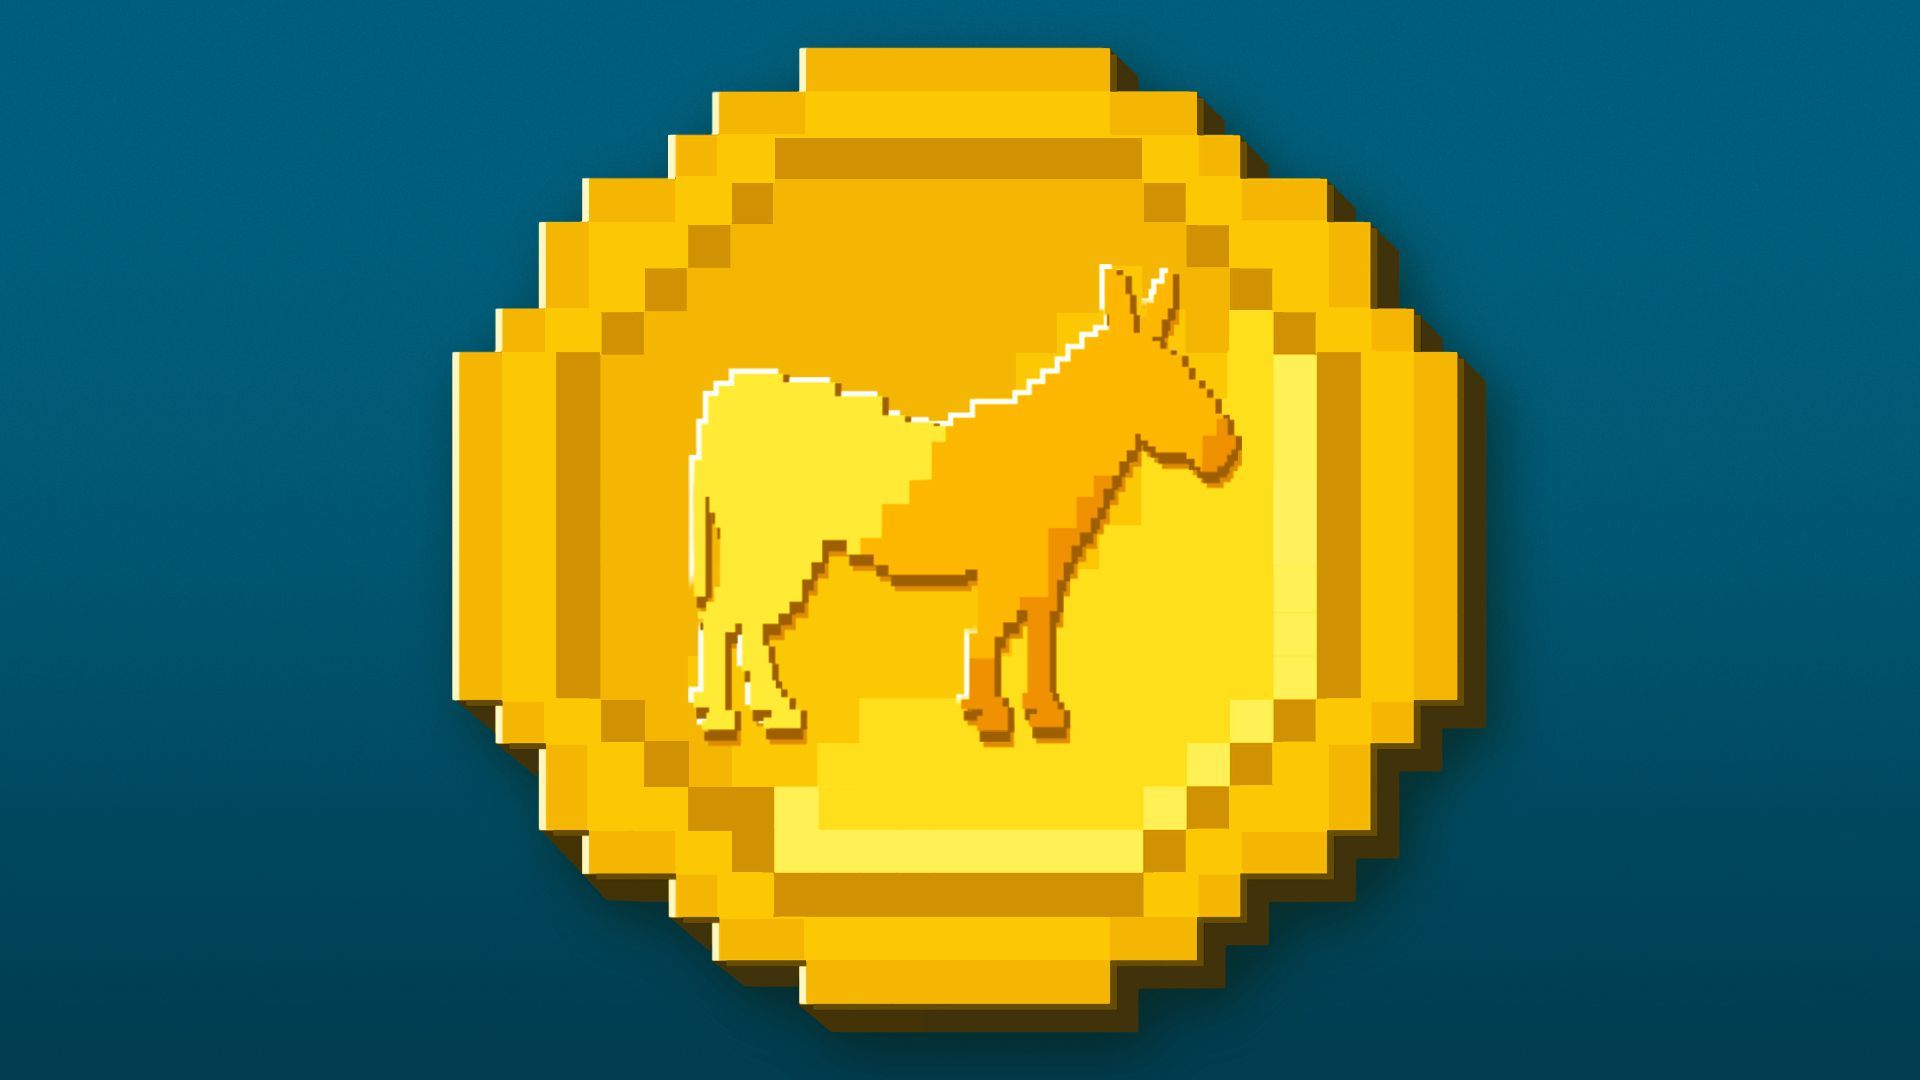 Illustration of a pixelated coin with a donkey in its center